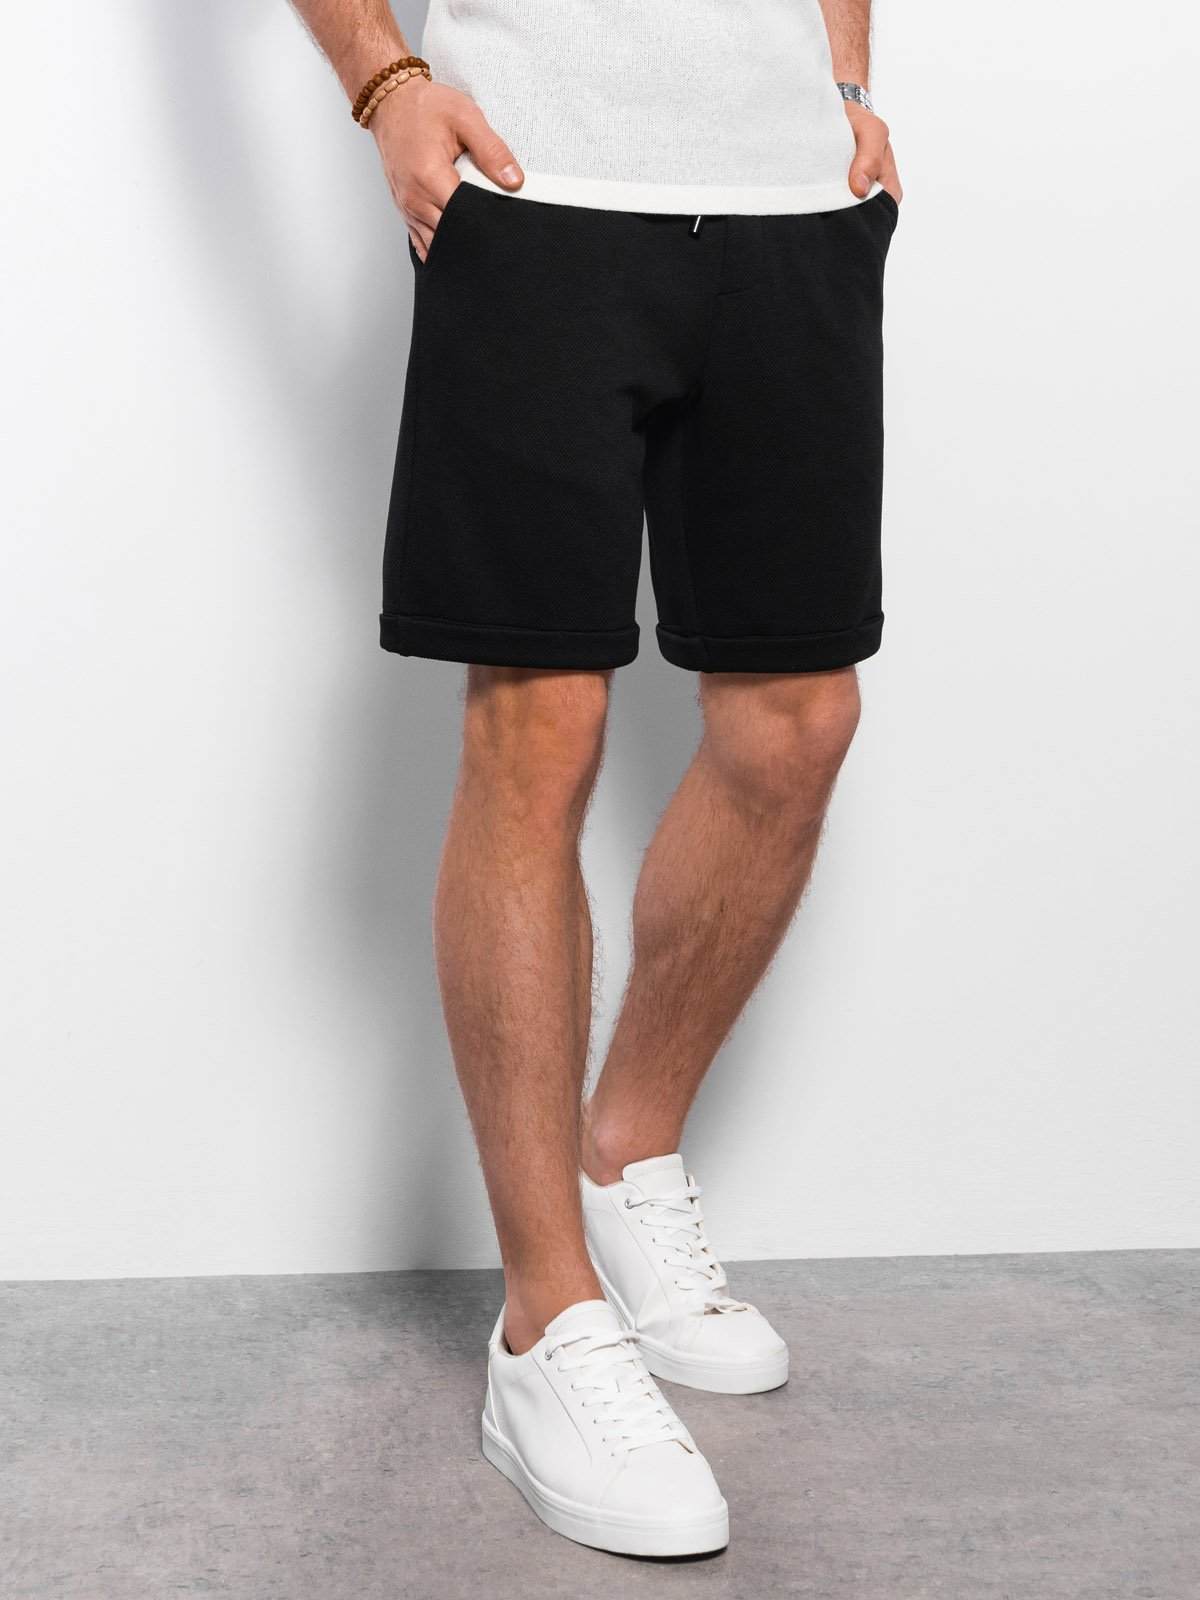 Ombre Men's knit shorts with elastic